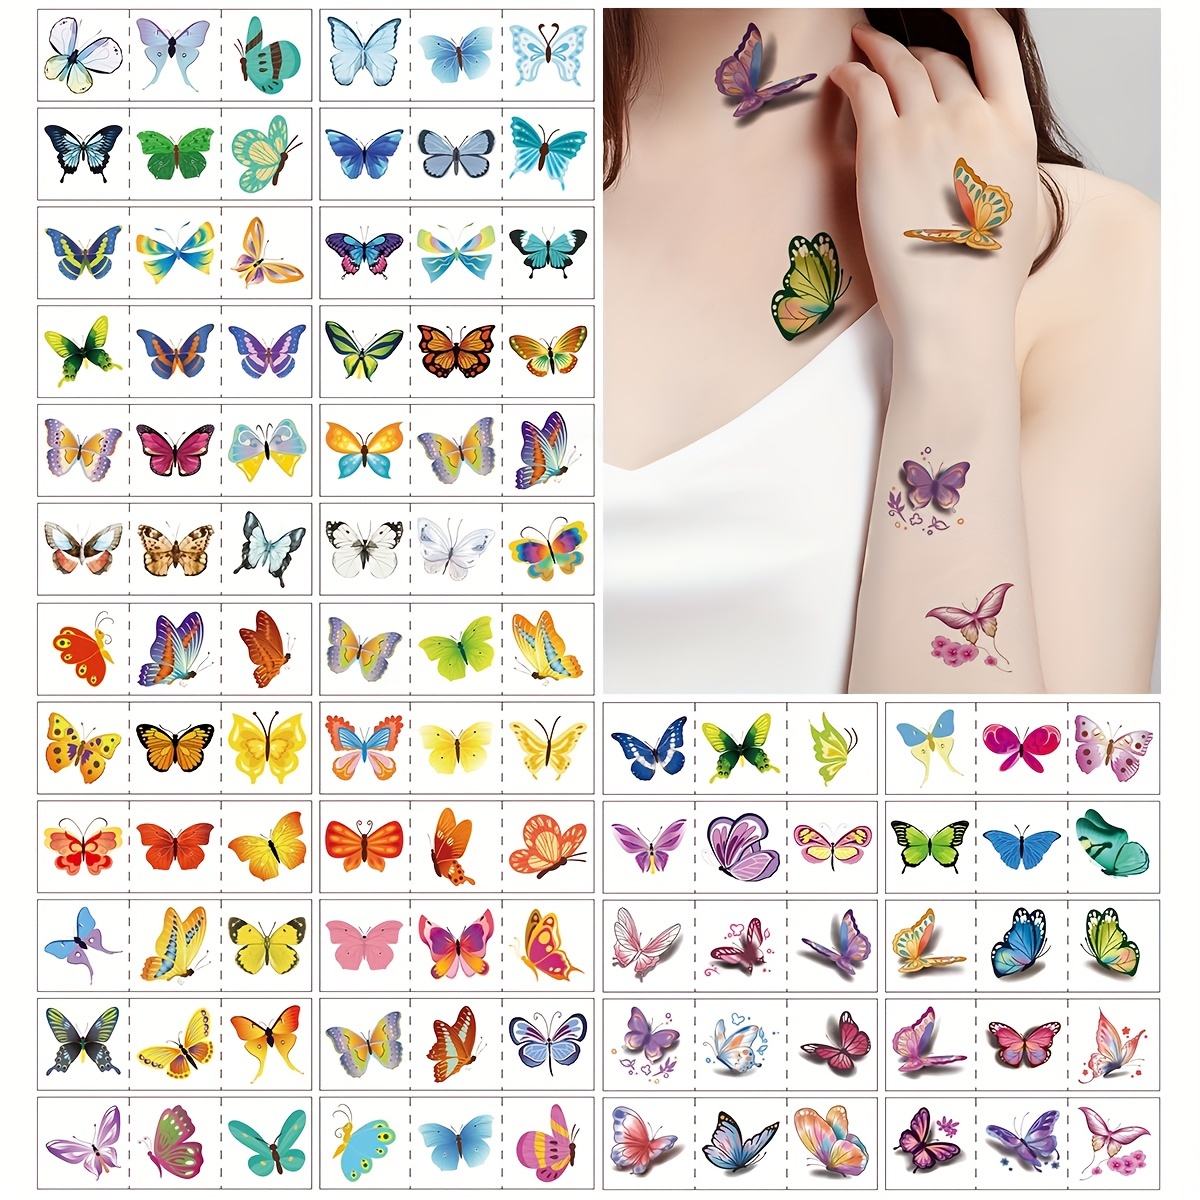 Butterfly Tattoo Sticker On Child Leg Dress Up Tattoos Stock Photo  Picture And Royalty Free Image Image 134399239